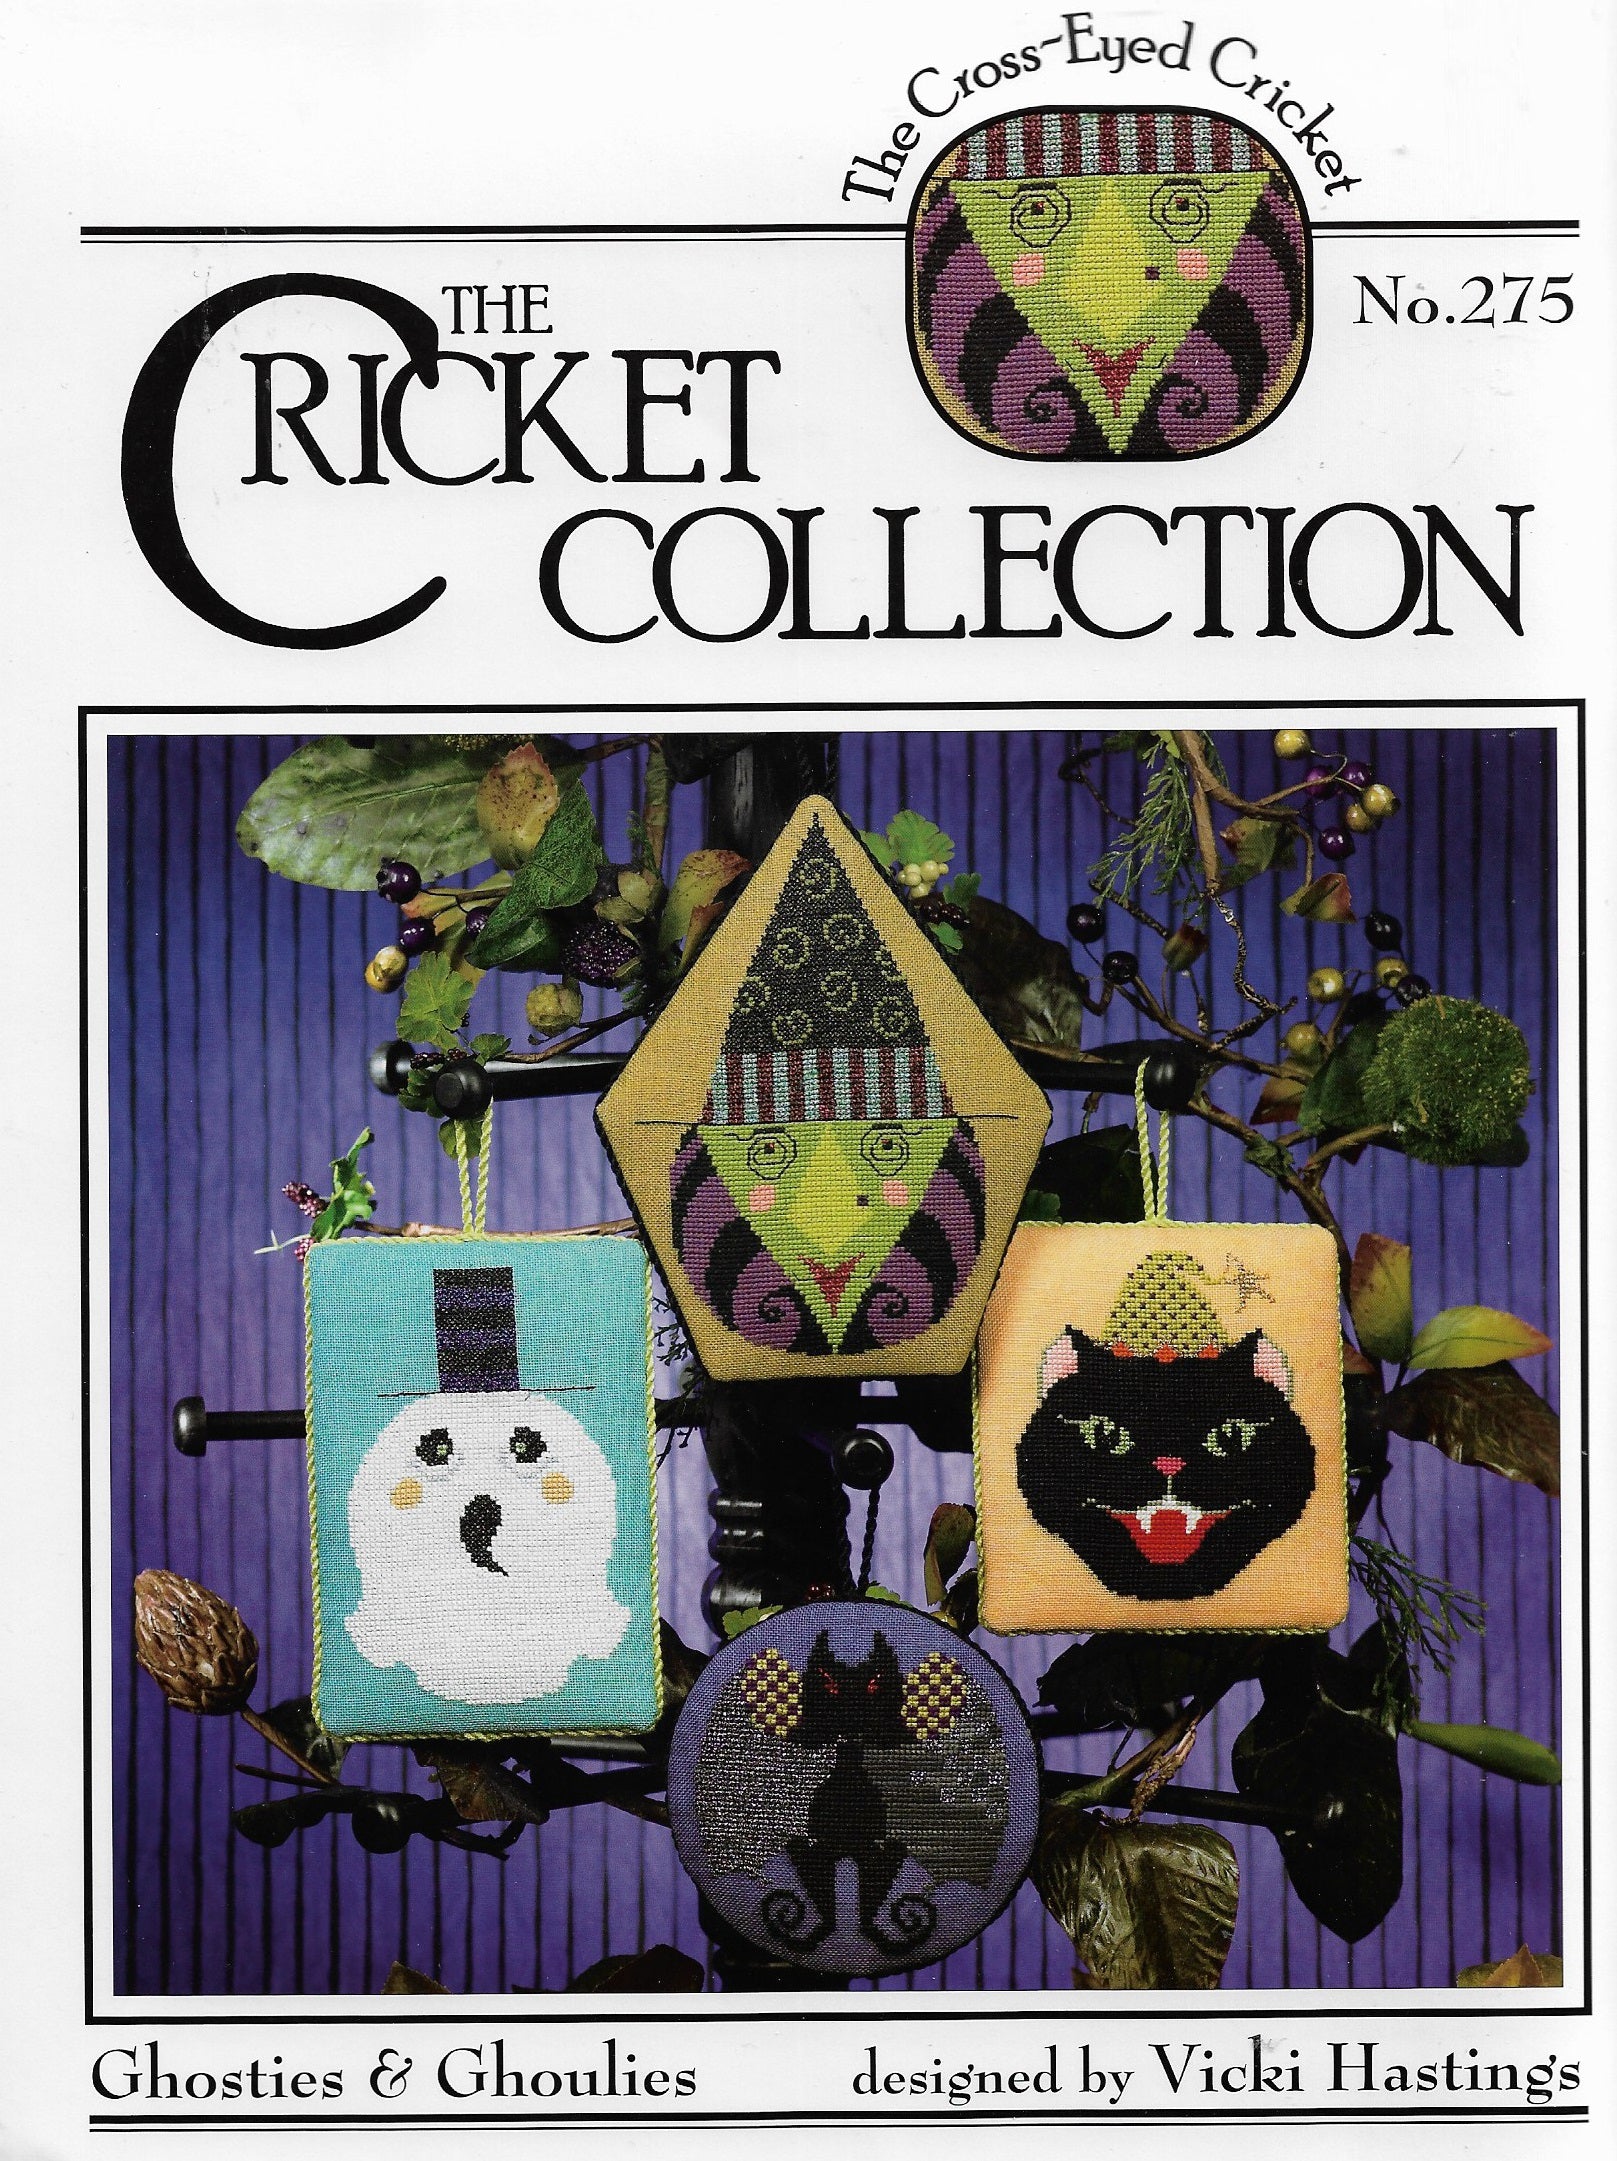 Cricket Collection Ghosties & Ghoulies CC275 halloween cross stitch ornament pattern